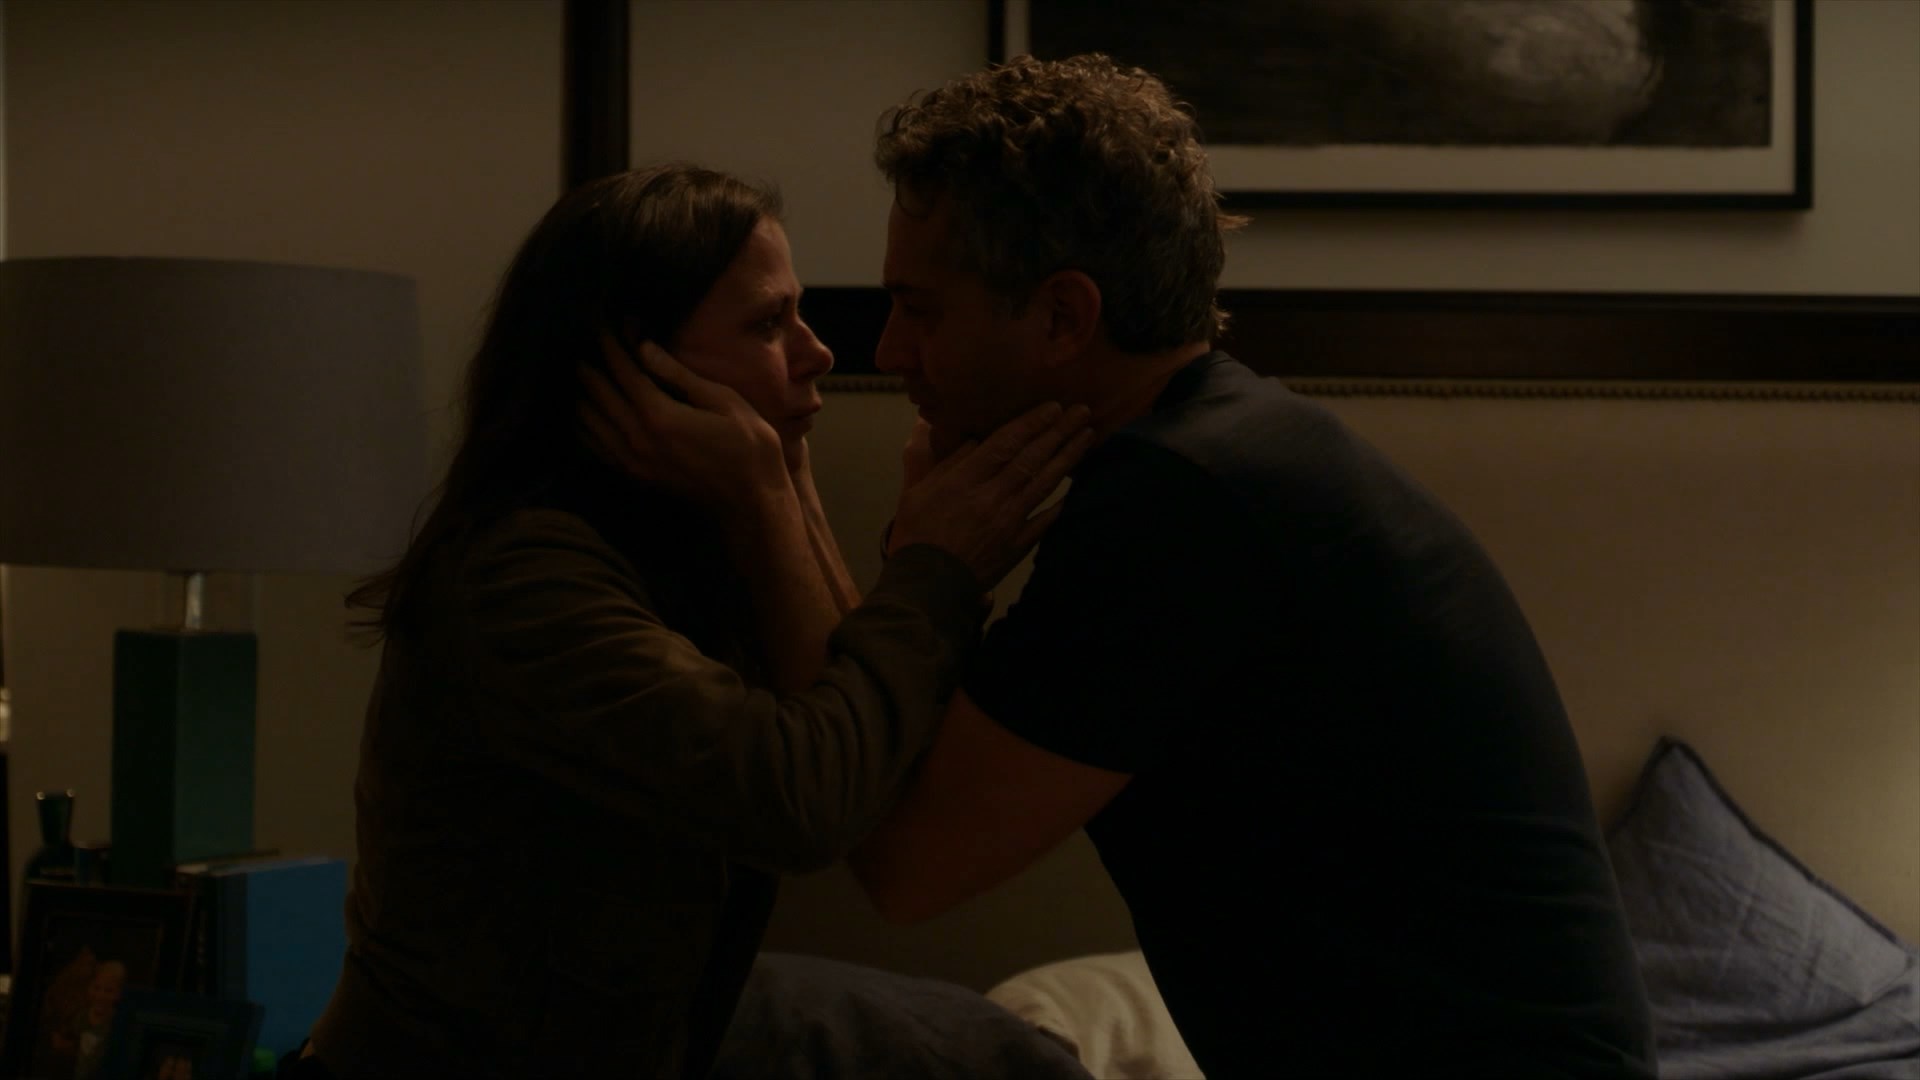 Emily Browning, Maura Tierney, Saana Lathan - The Affair S04E07 - 1080p 